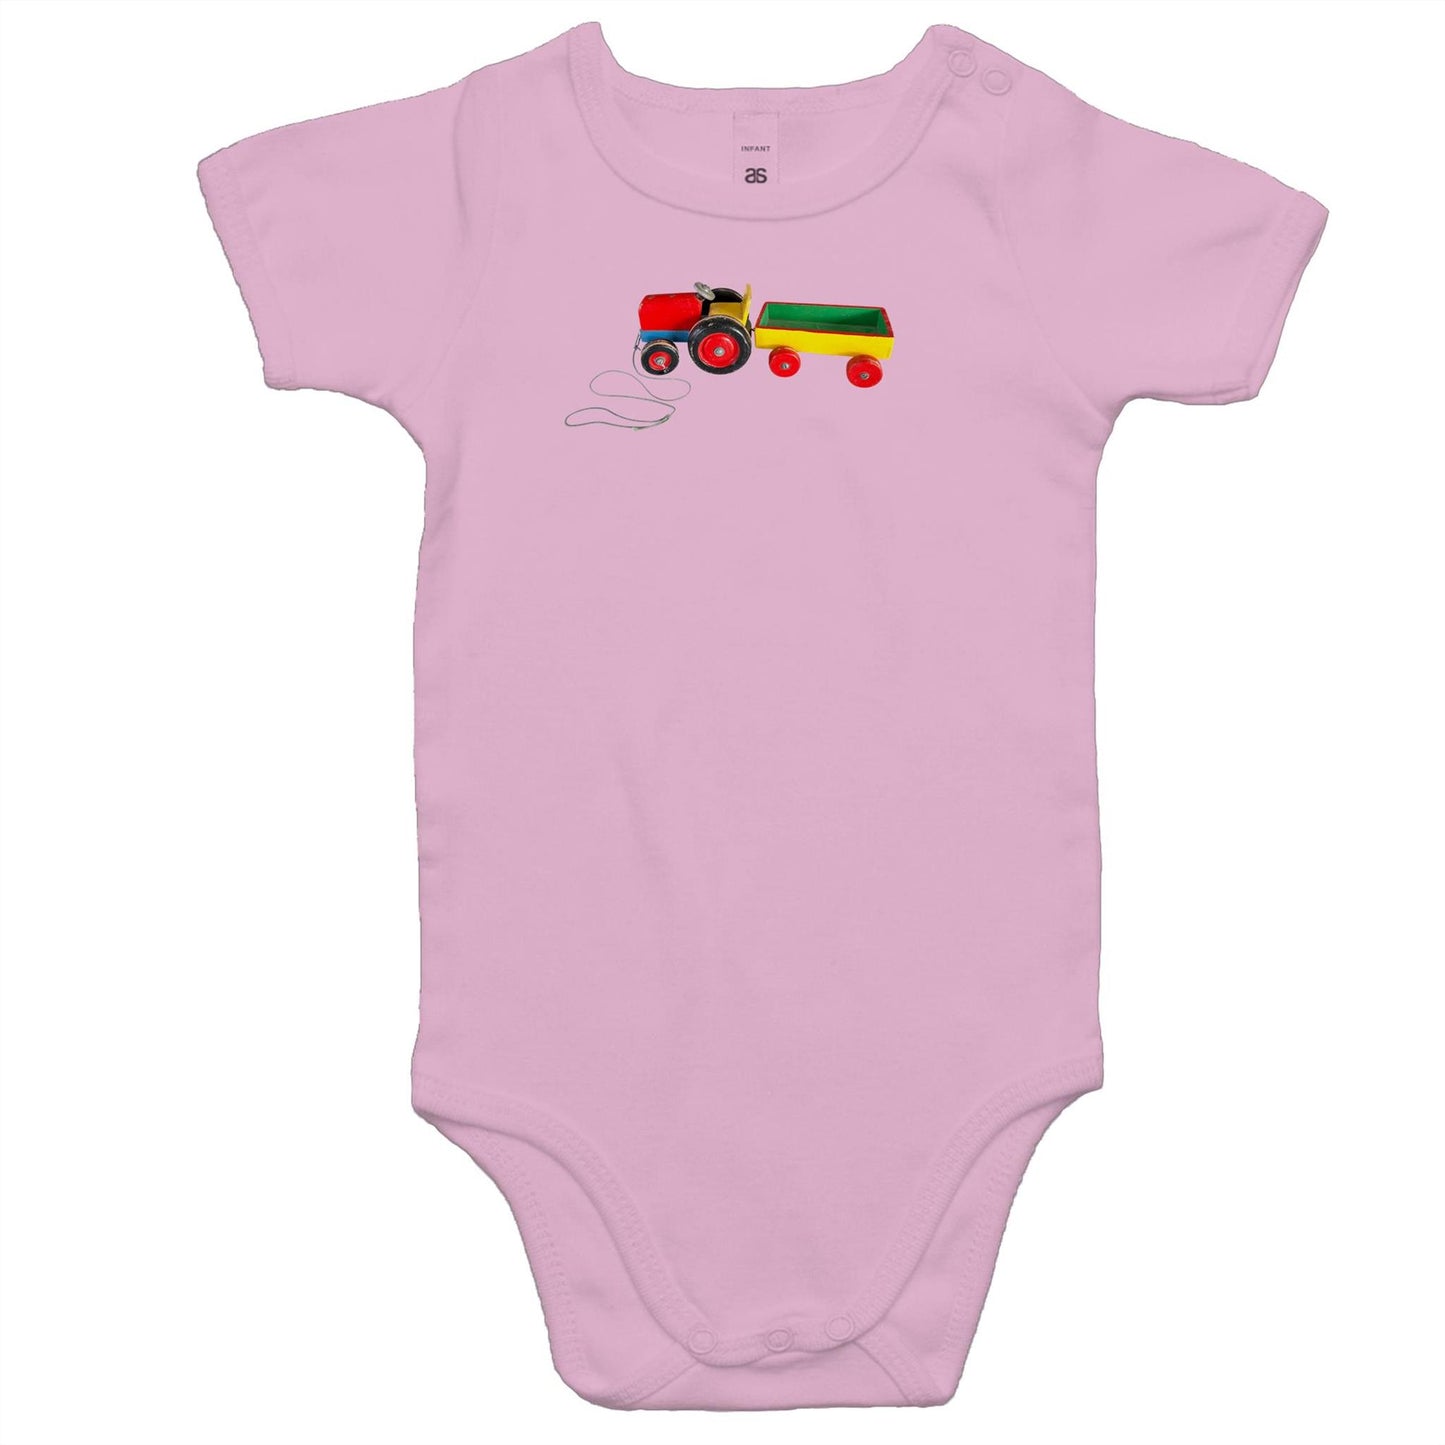 Toy Tractor Rompers for Babies